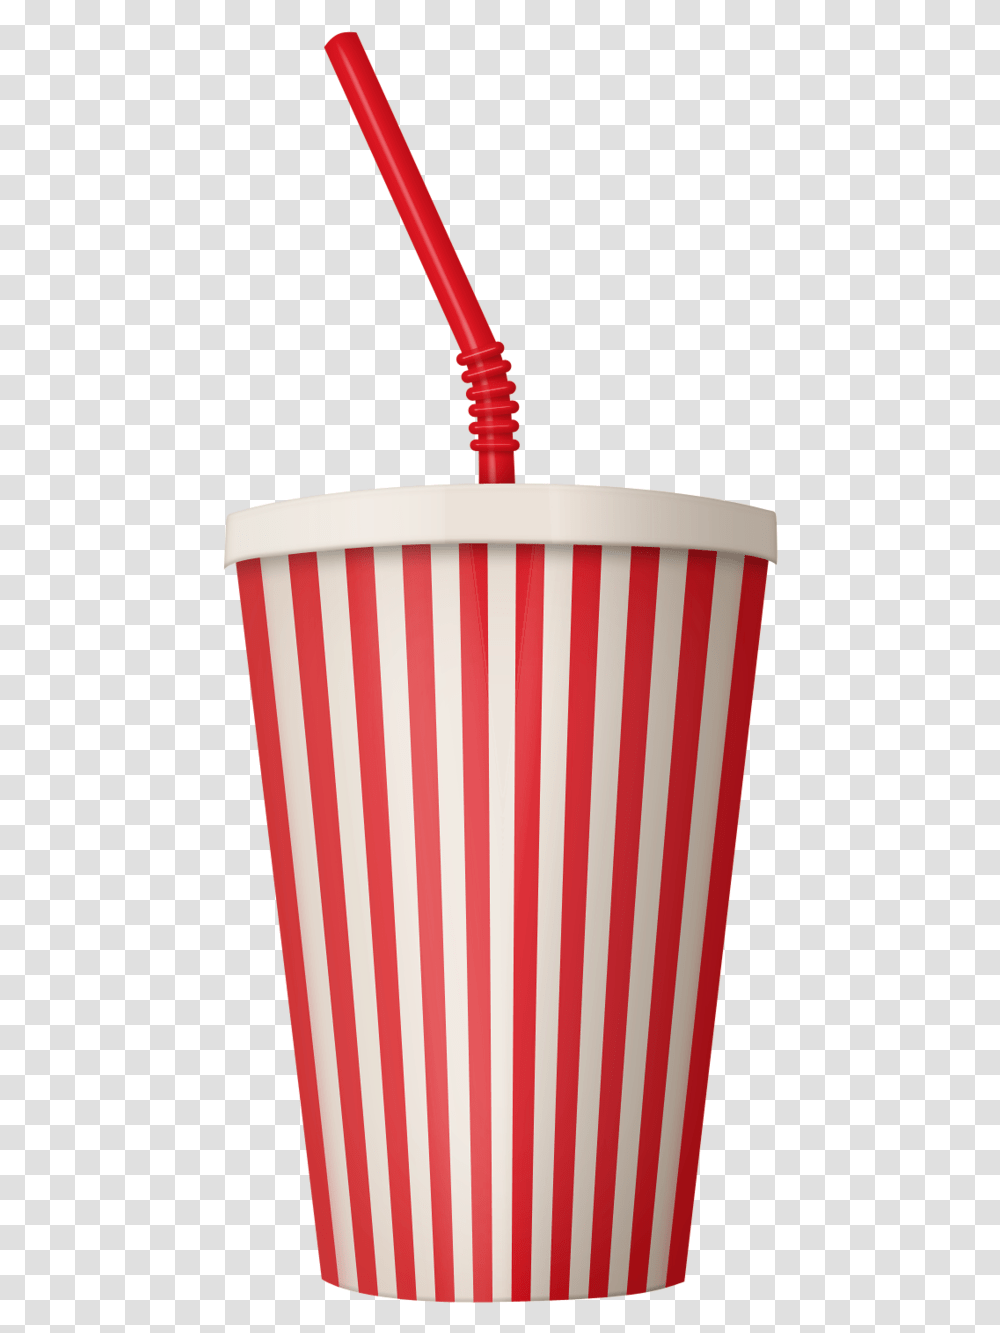 Plastic Drink Cup Vector Clipart Image Plastic Drink Cup, Soda, Beverage, Word, Food Transparent Png